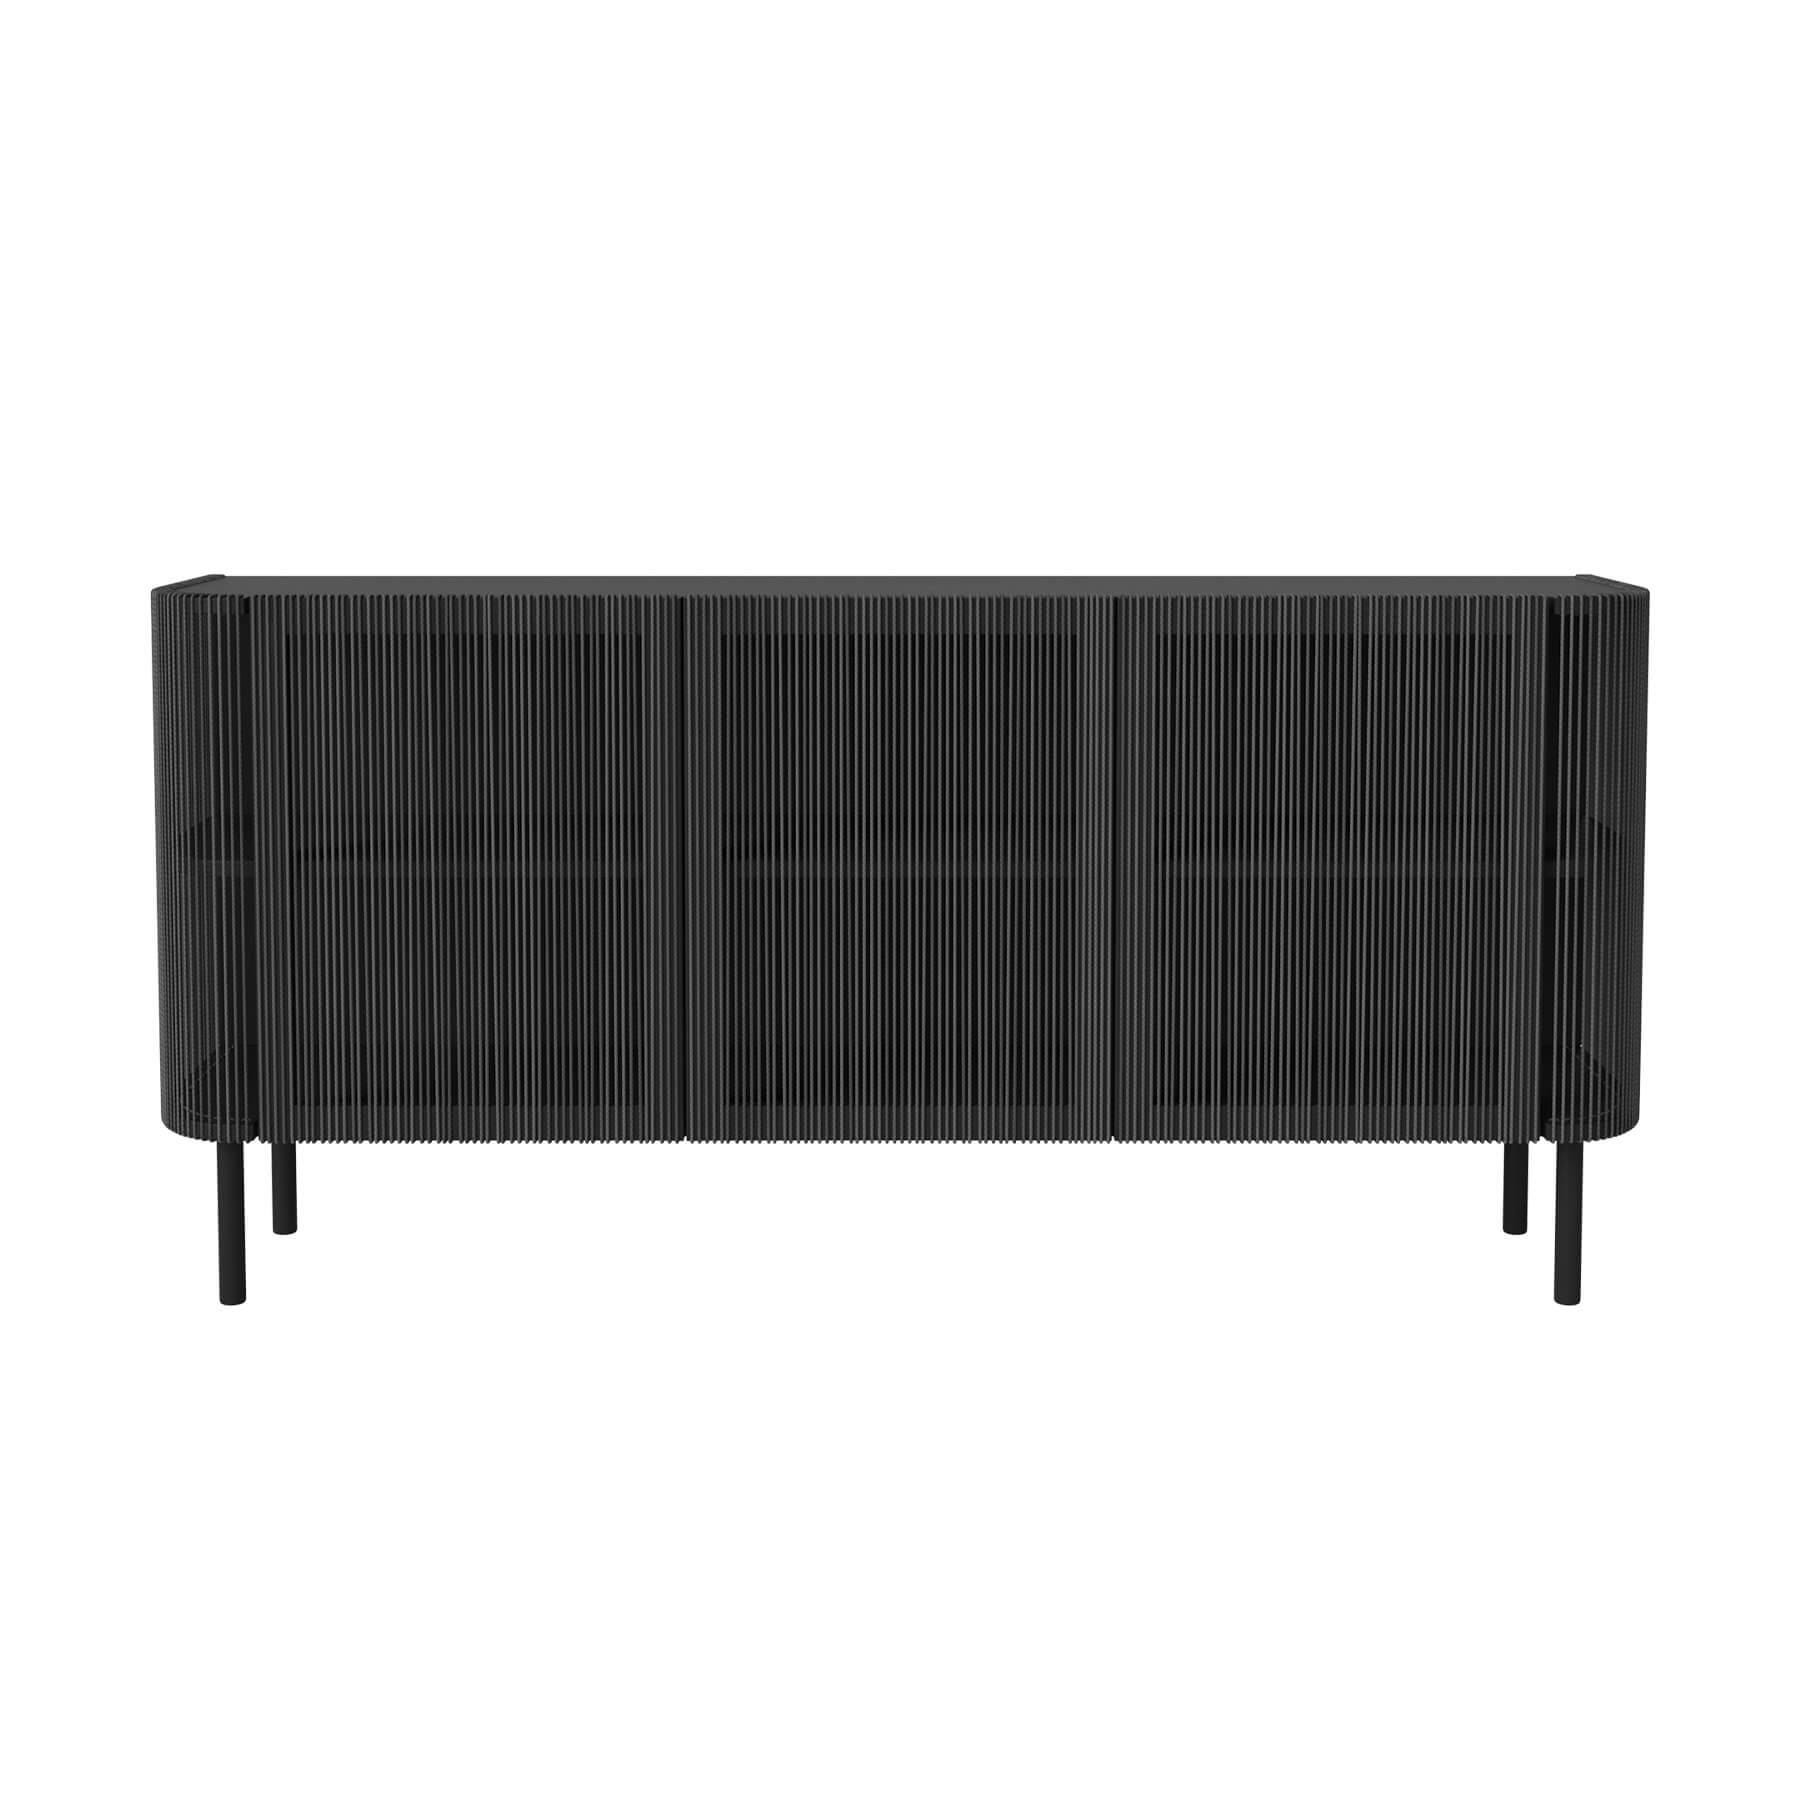 Bolia Cord Sideboard Black Bolia Cord Large Designer Furniture From Holloways Of Ludlow